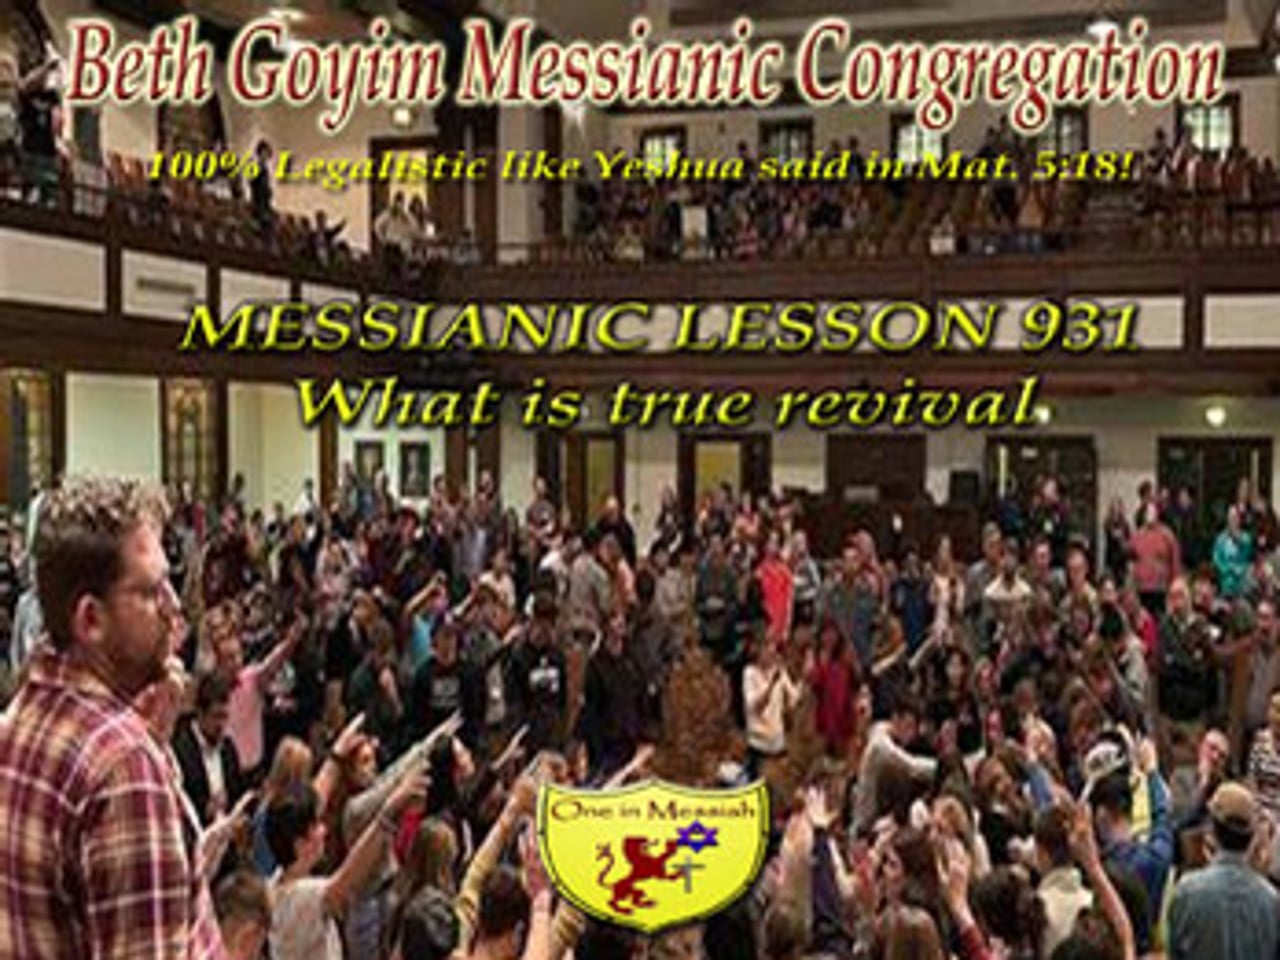 BGMCTV MESSIANIC LESSON 931 WHAT IS TRUE REVIVAL